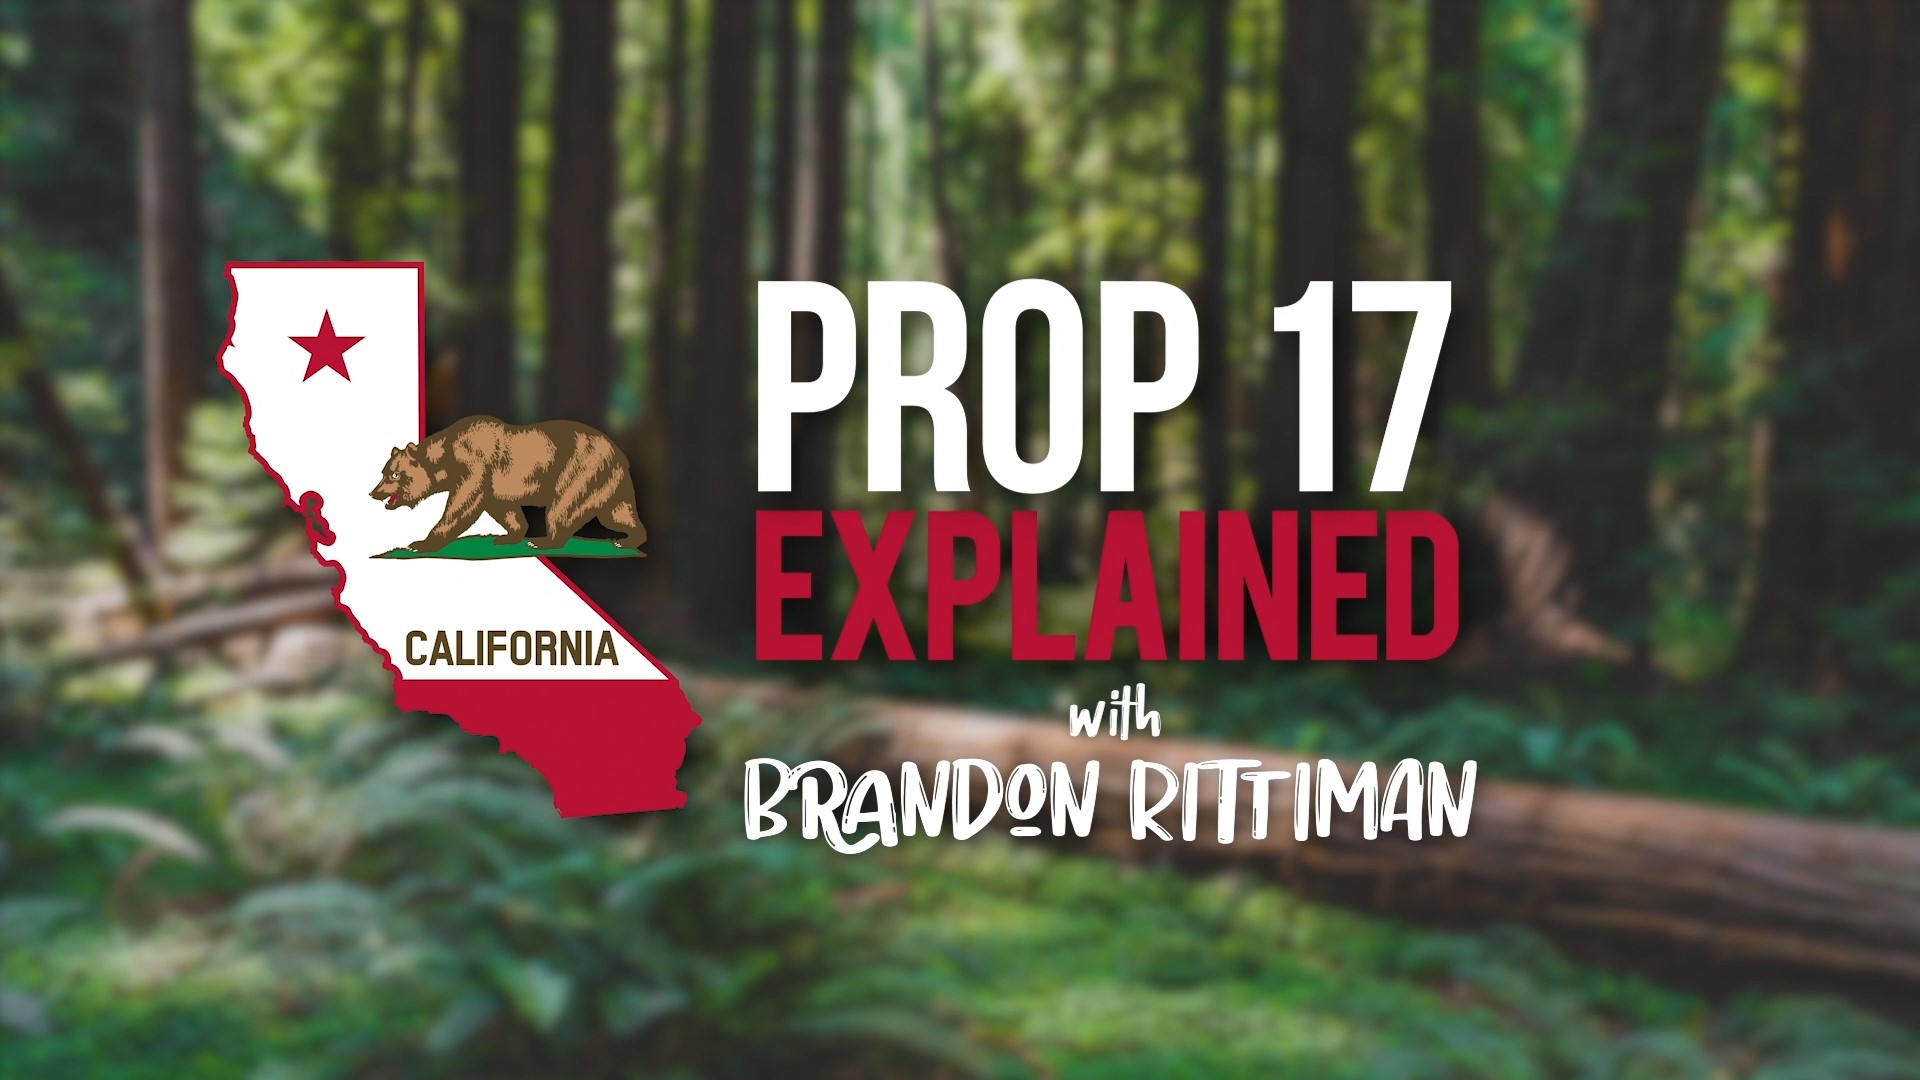 ABC10's Brandon Rittiman takes a closer look at California Proposition 17, Voting Rights Restoration for Persons on Parole Amendment.